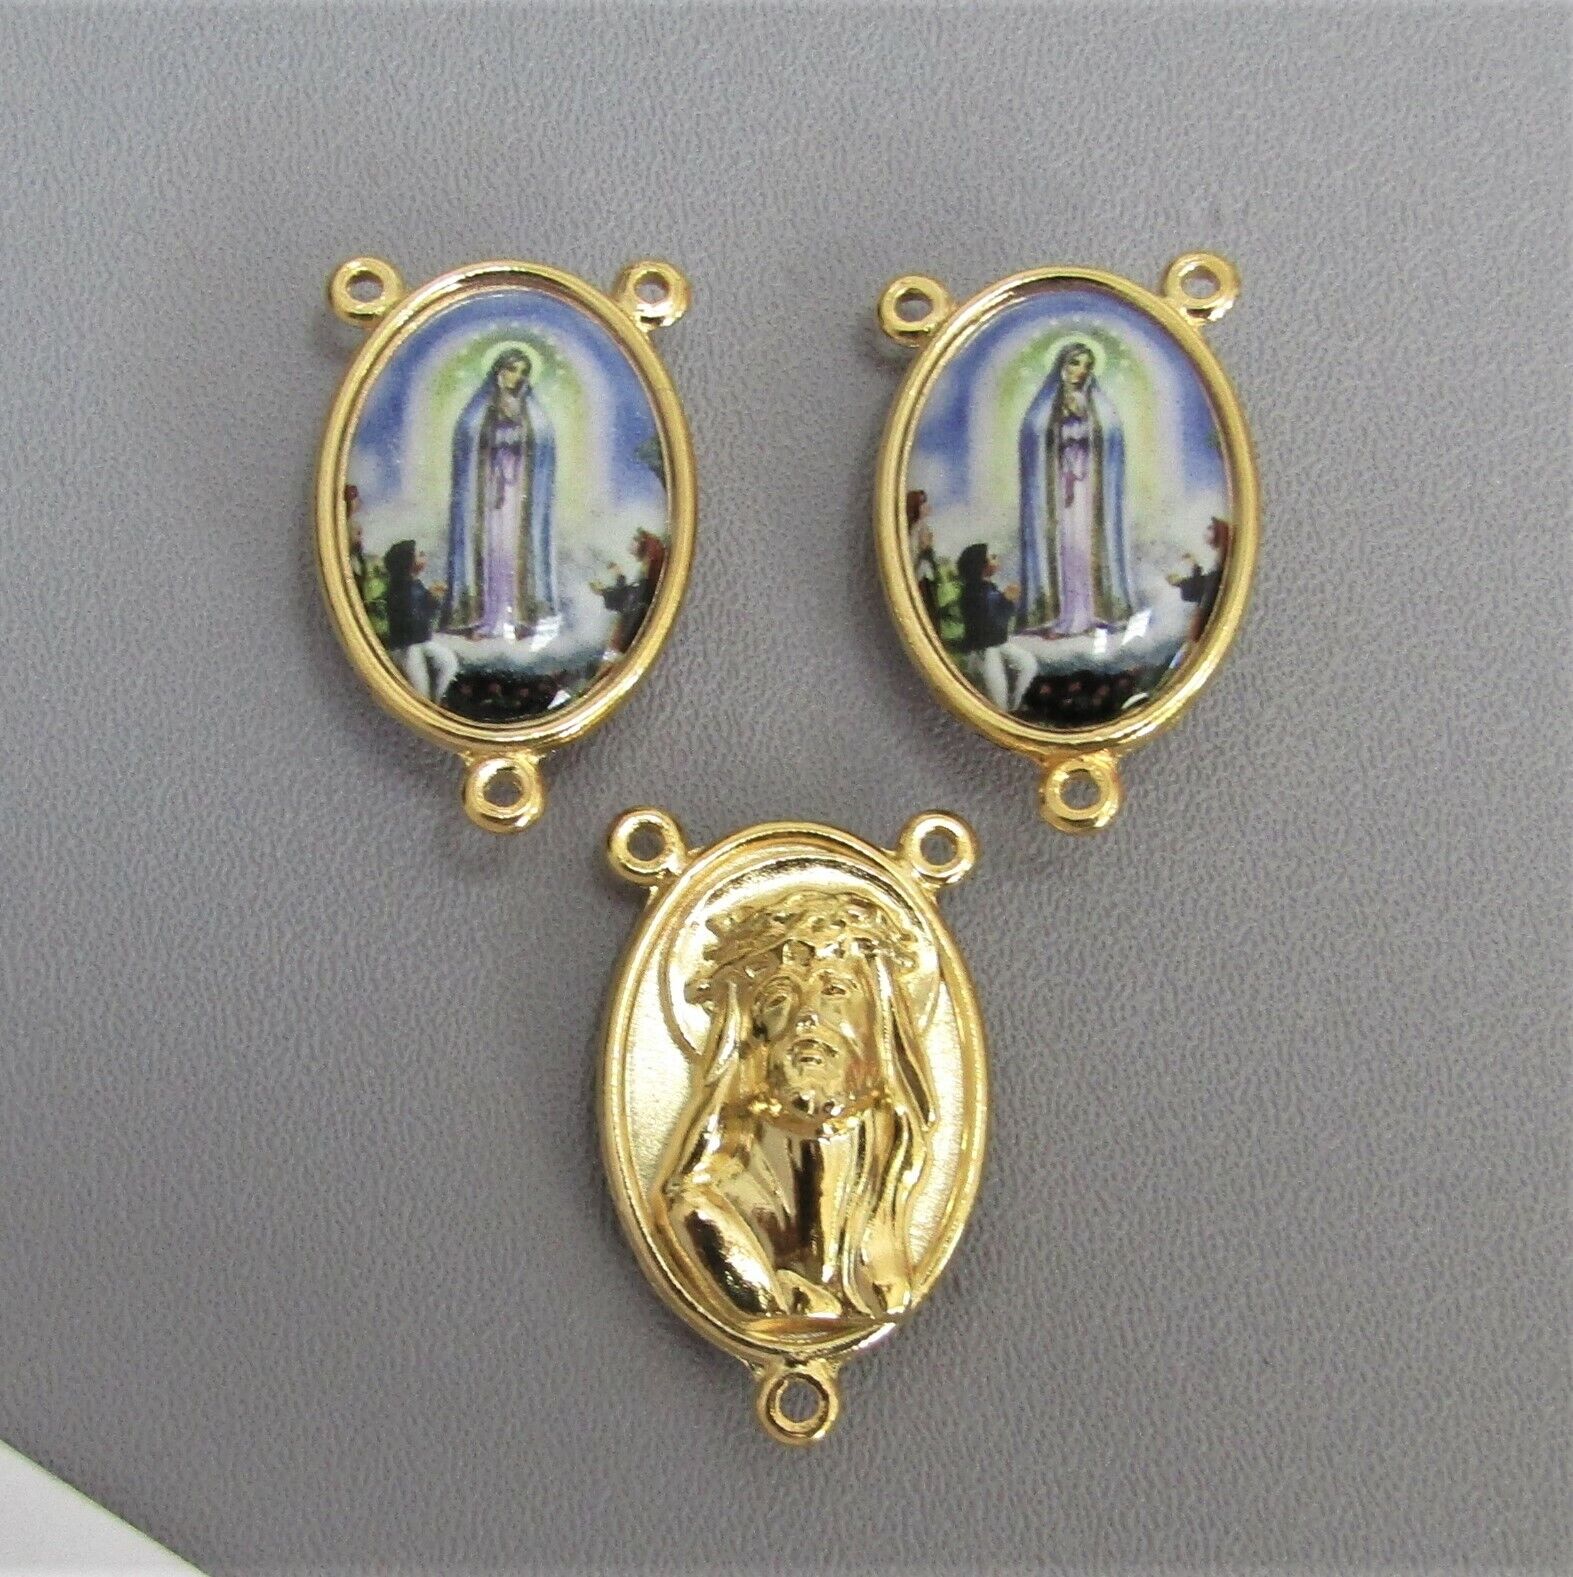 3 pc Our Lady of FATIMA Rosary Center ITALY Rosaries Centerpiece LARGE Gold E141